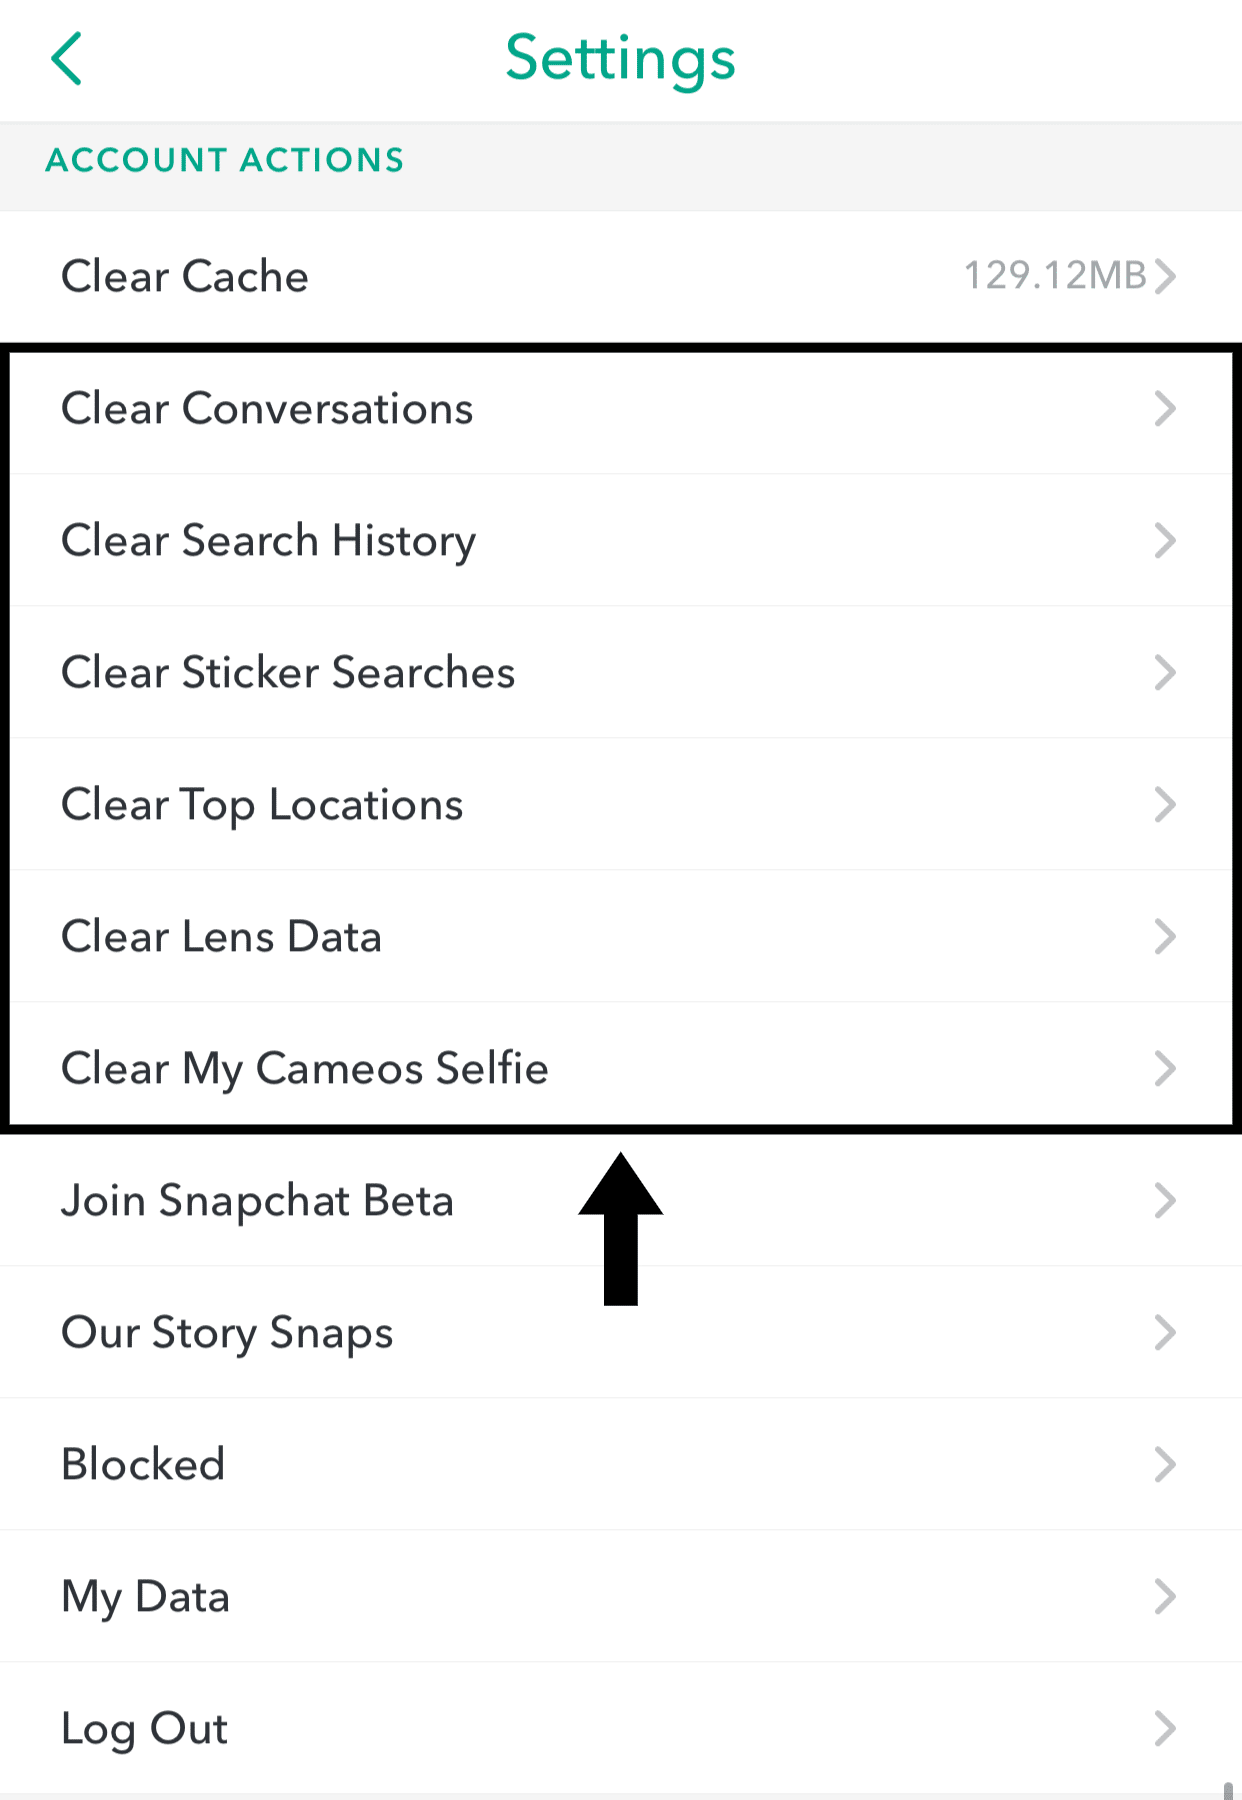 Clear Snapchat app data to fix Snapchat notifications not working